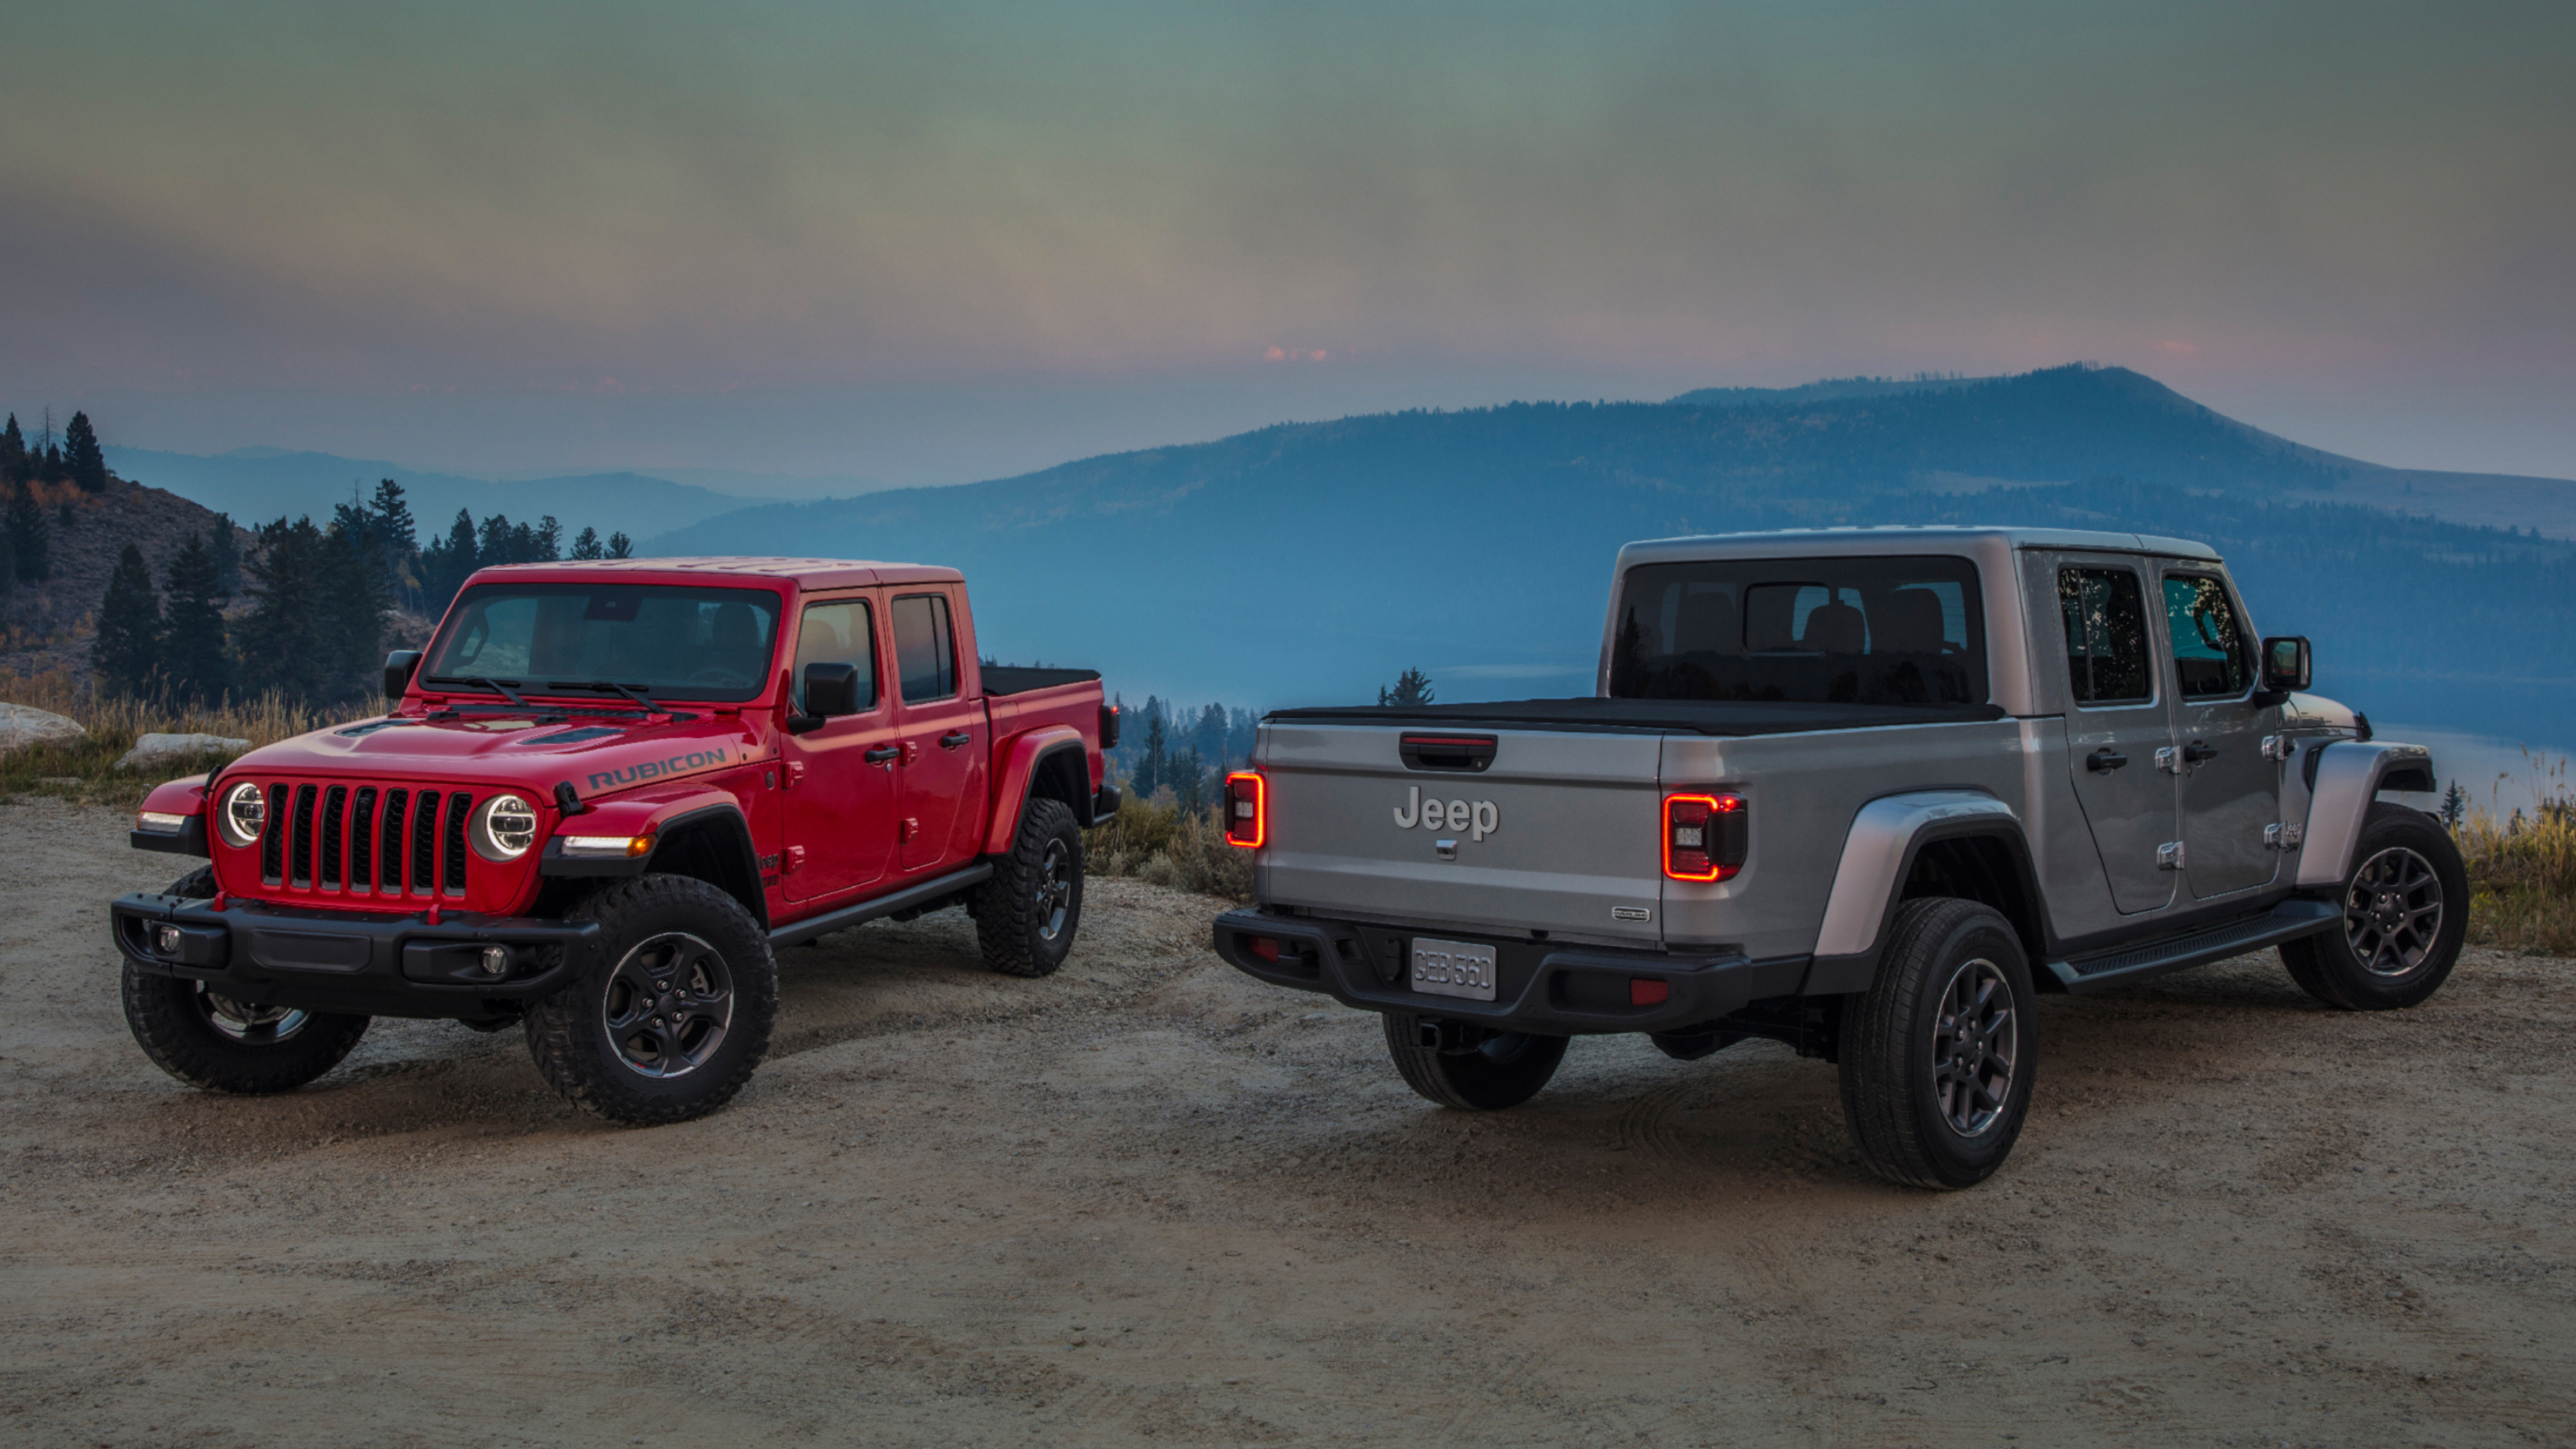 Jeep Gladiator, Off-road capabilities, Rubicon edition, Rugged styling, 3840x2160 4K Desktop